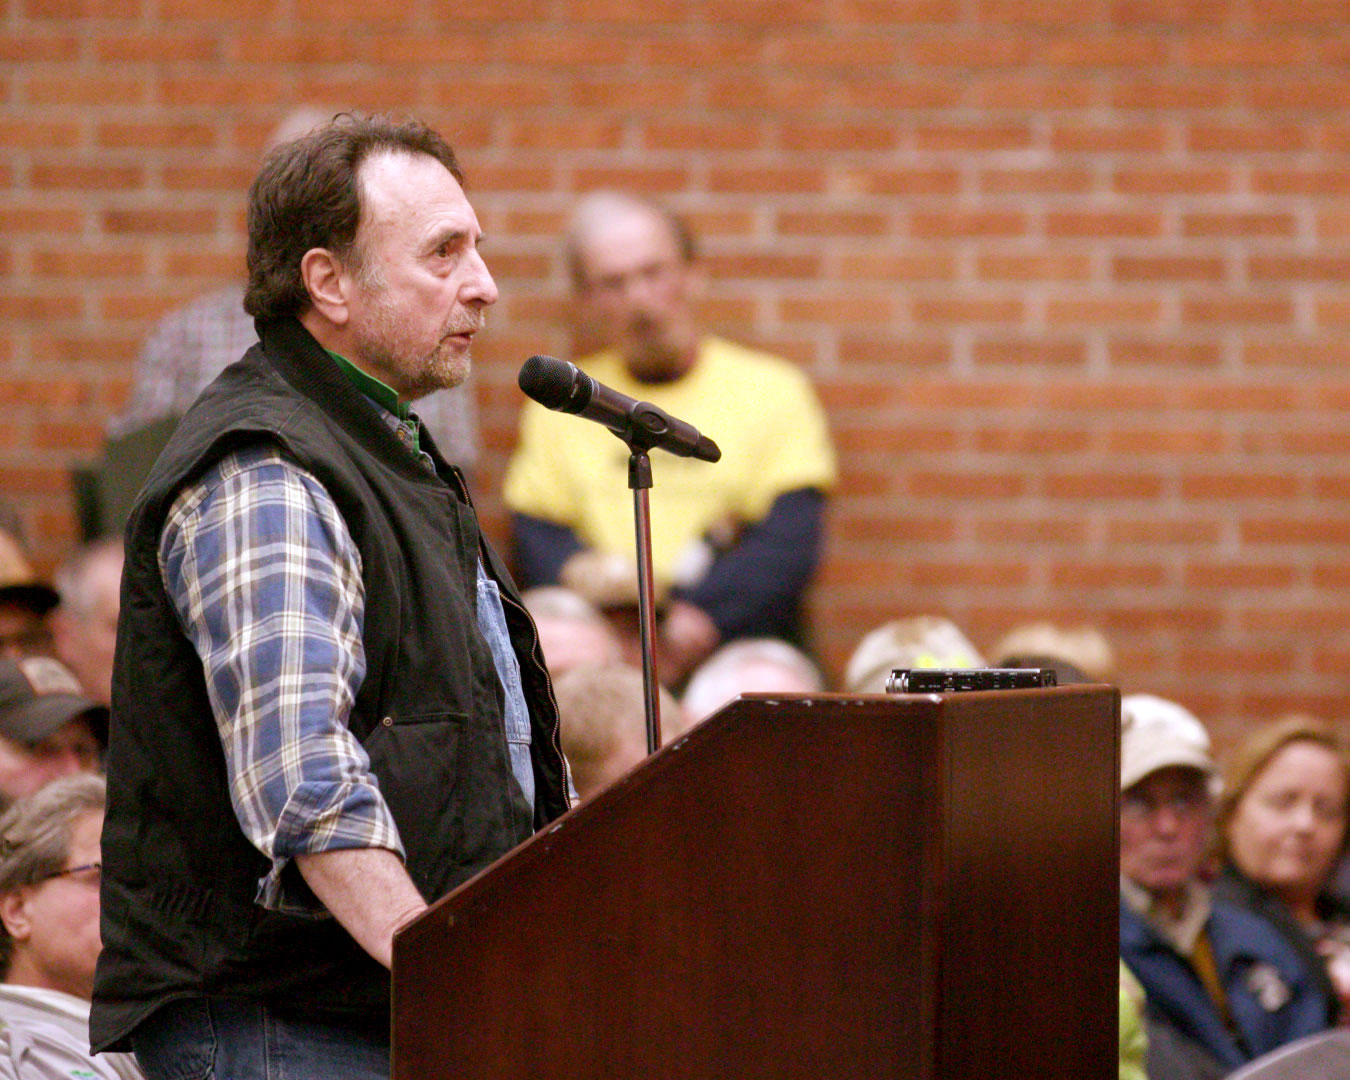 At the IDEM listening session on December 5, 2018, Dale resident Joseph Nickolick spoke against the plant being built, saying IDEM wasn't doing its job in protecting the environment.